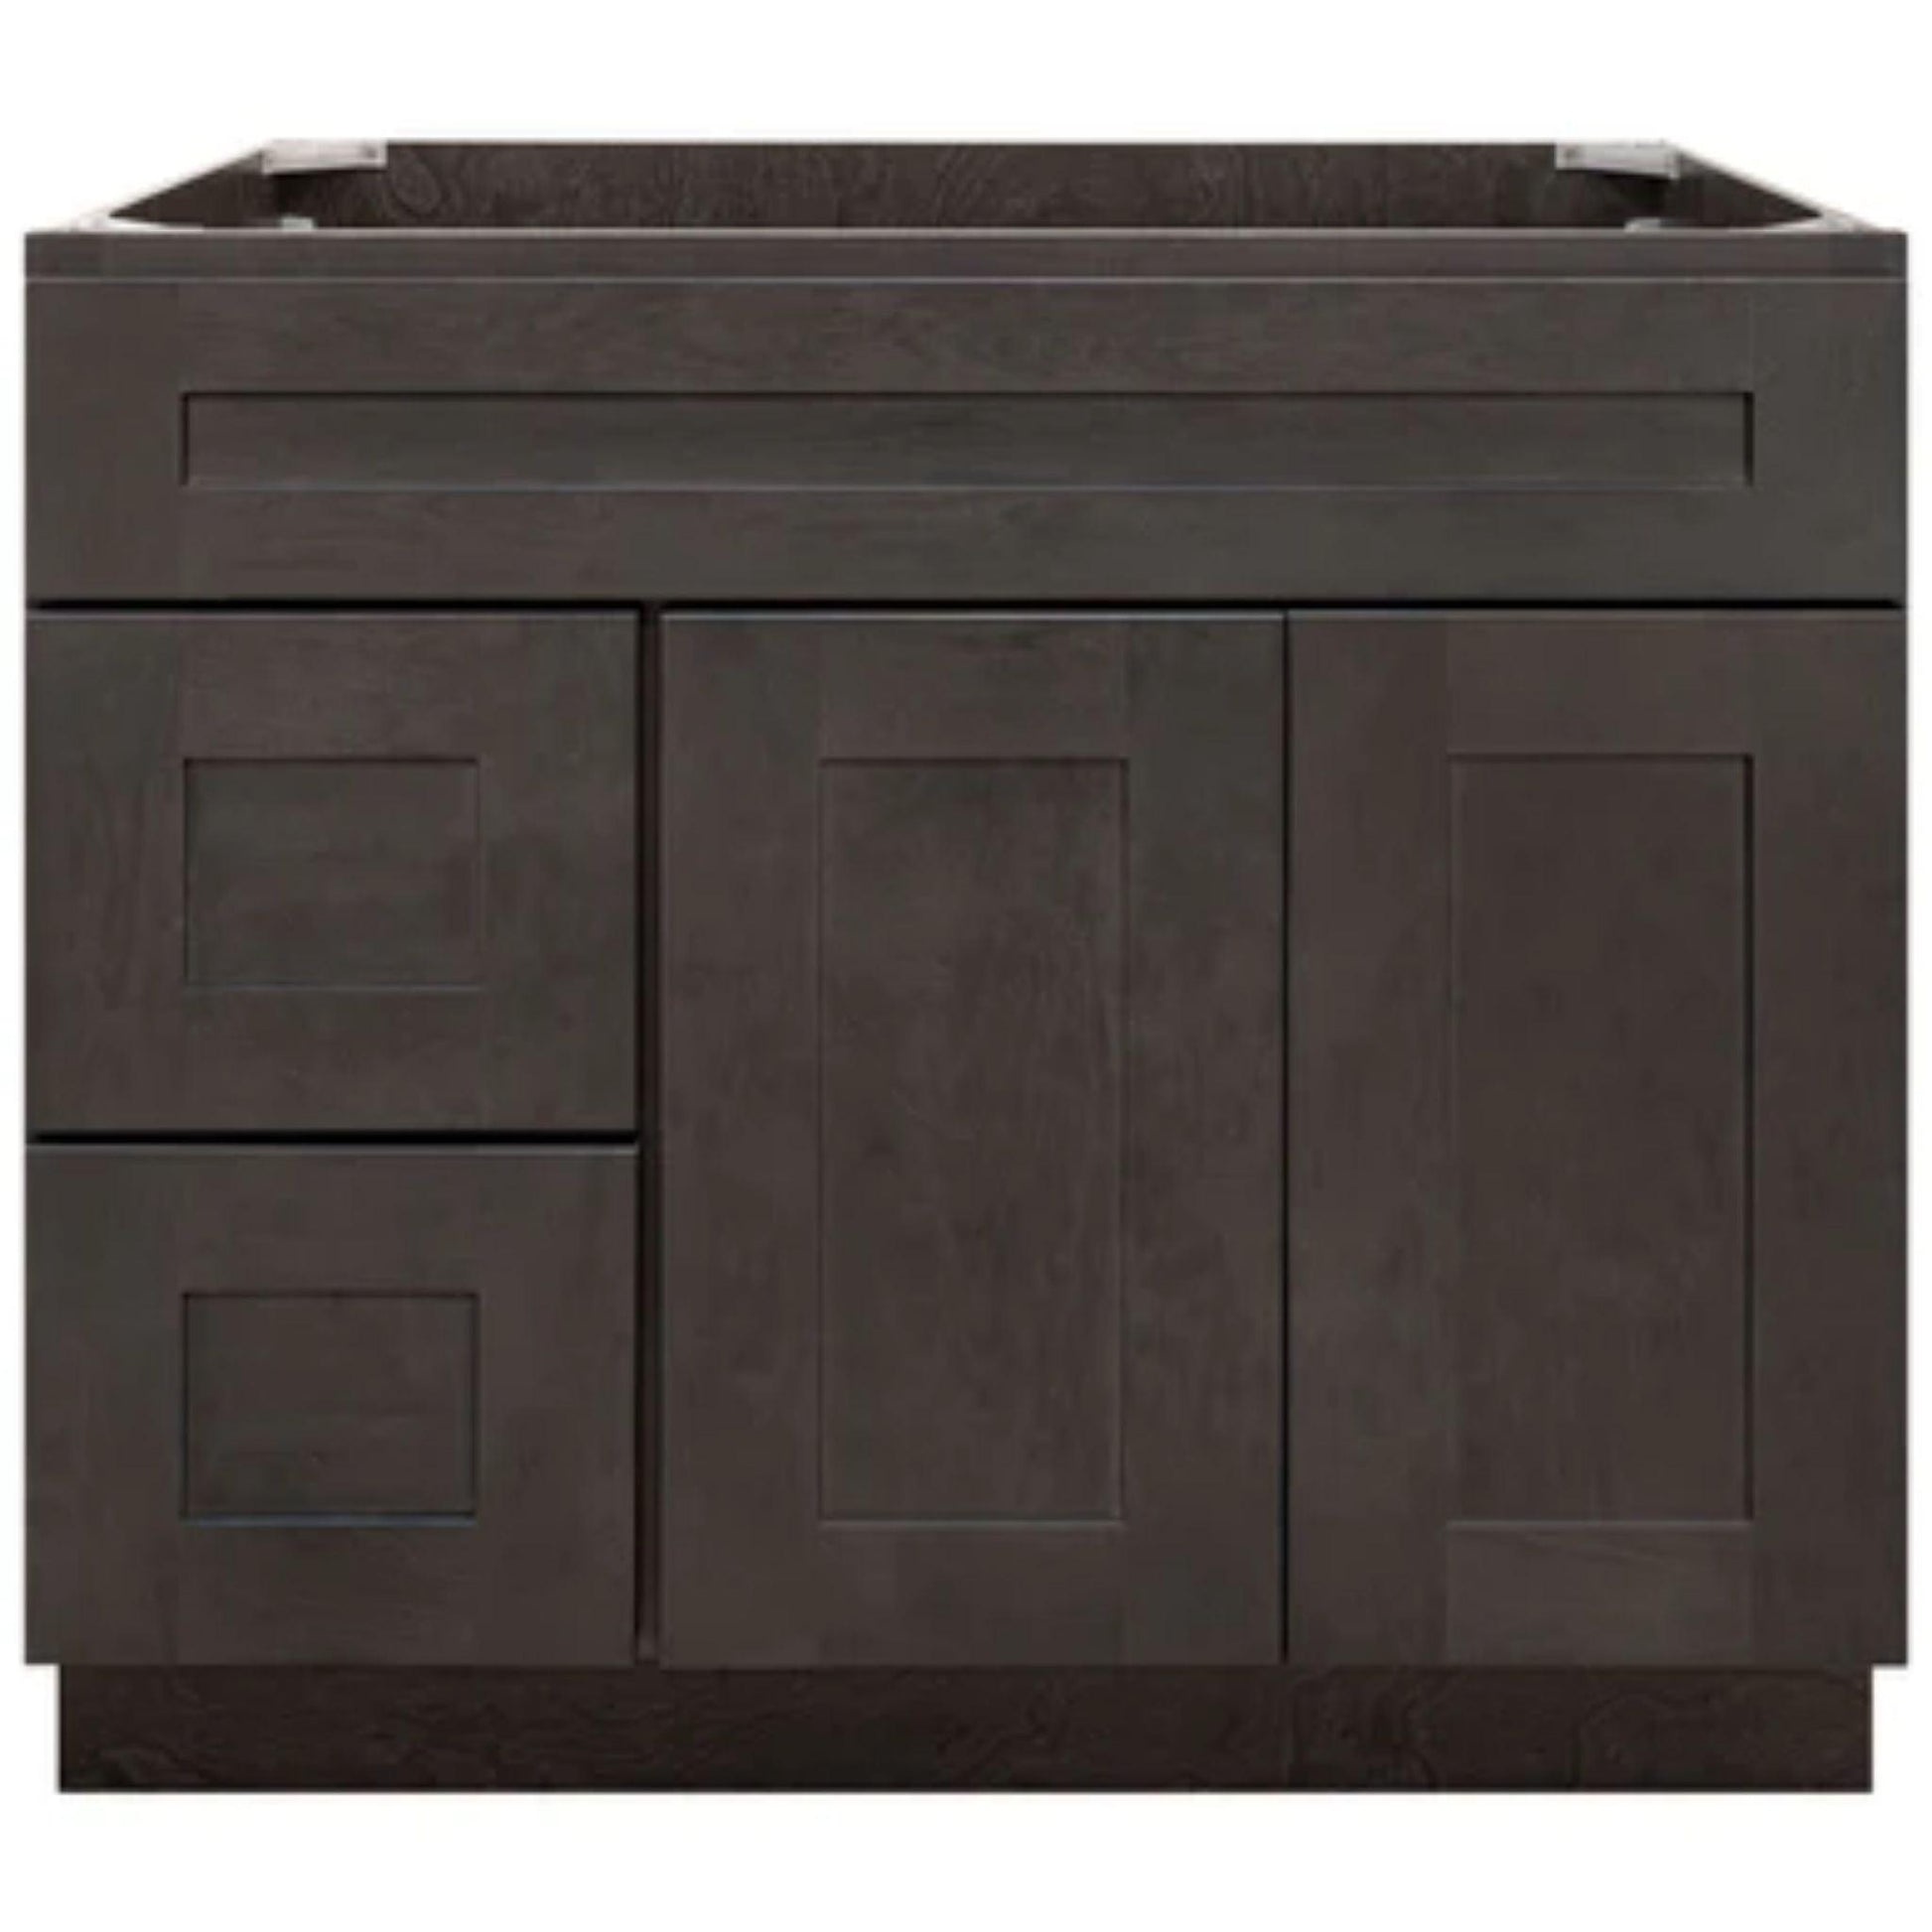 LessCare 36" x 21" x 34 1/2" Dover Gray Vanity Sink Base Cabinet with Left Drawers